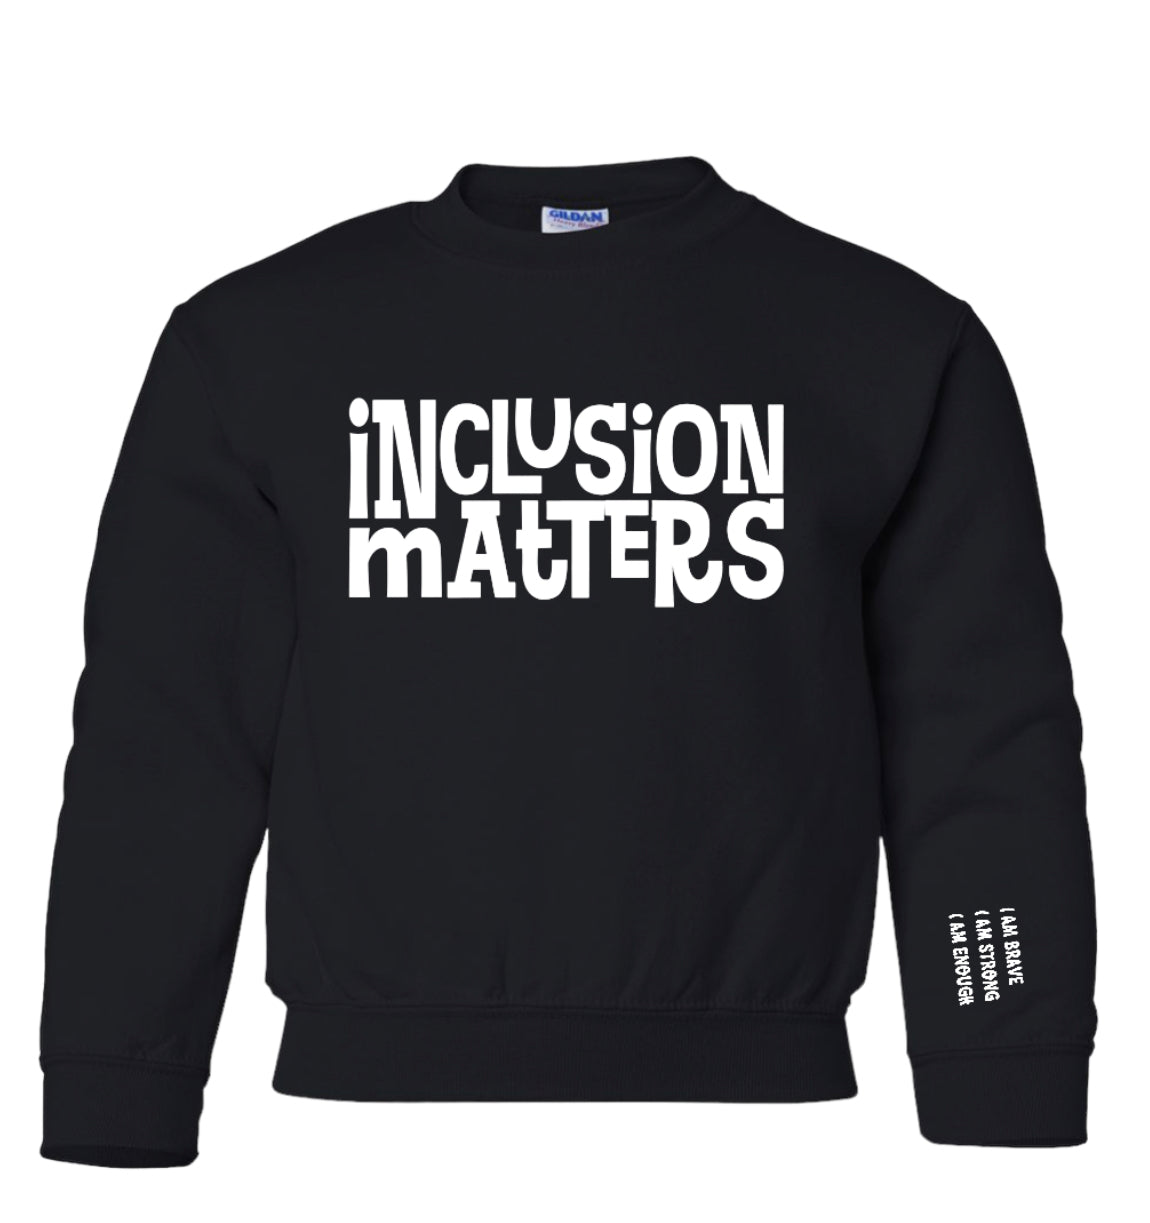 INCLUSION MATTERS.